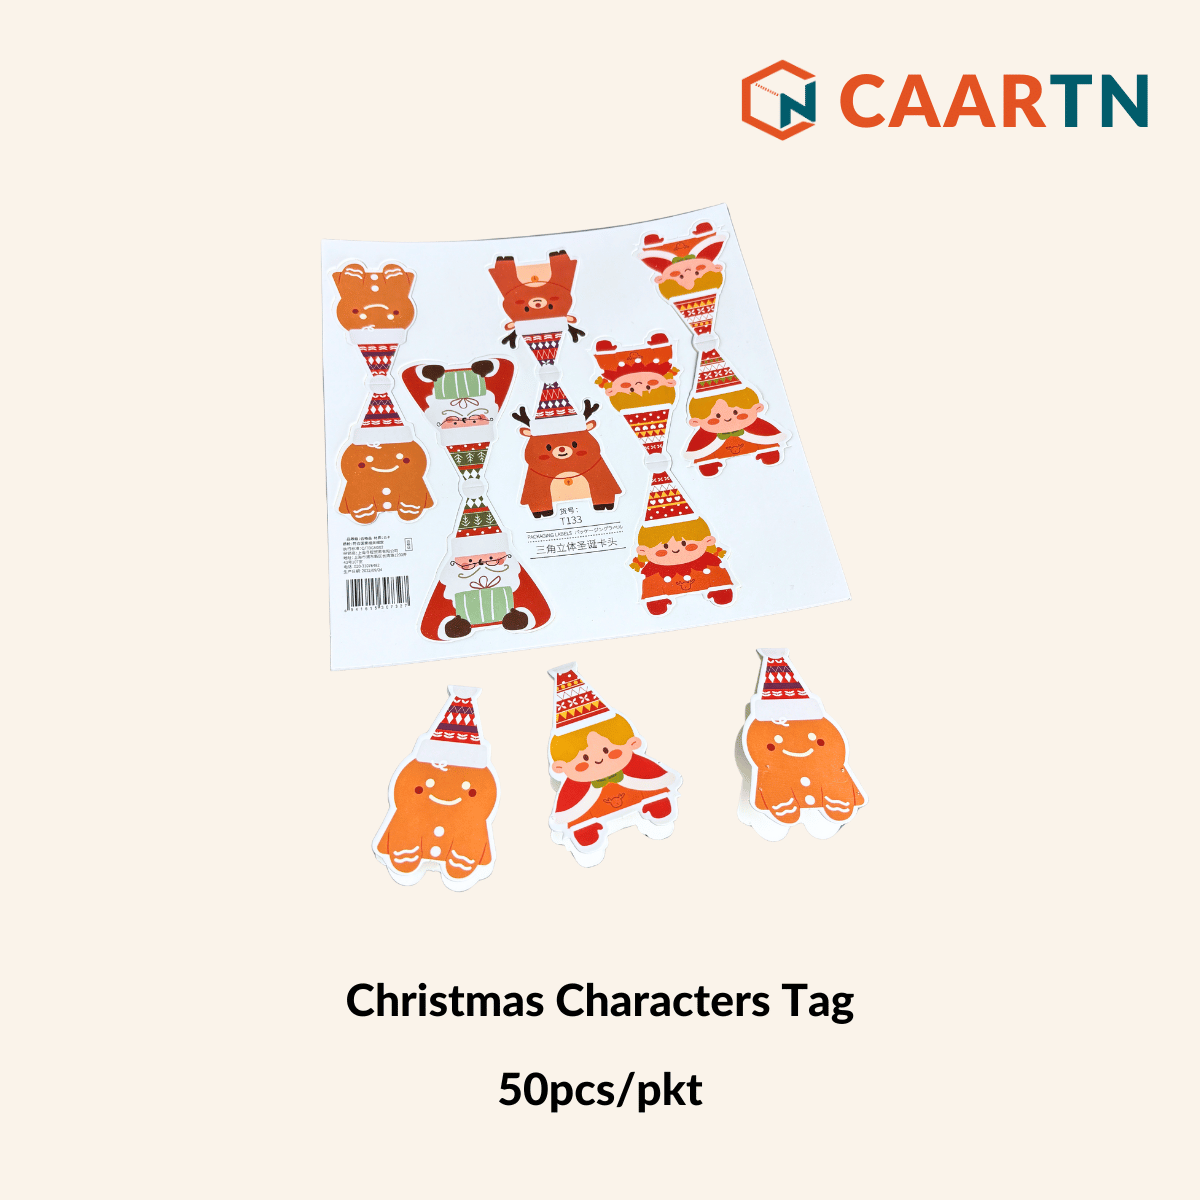 Christmas Cookie Tags - 50pcs/pkt